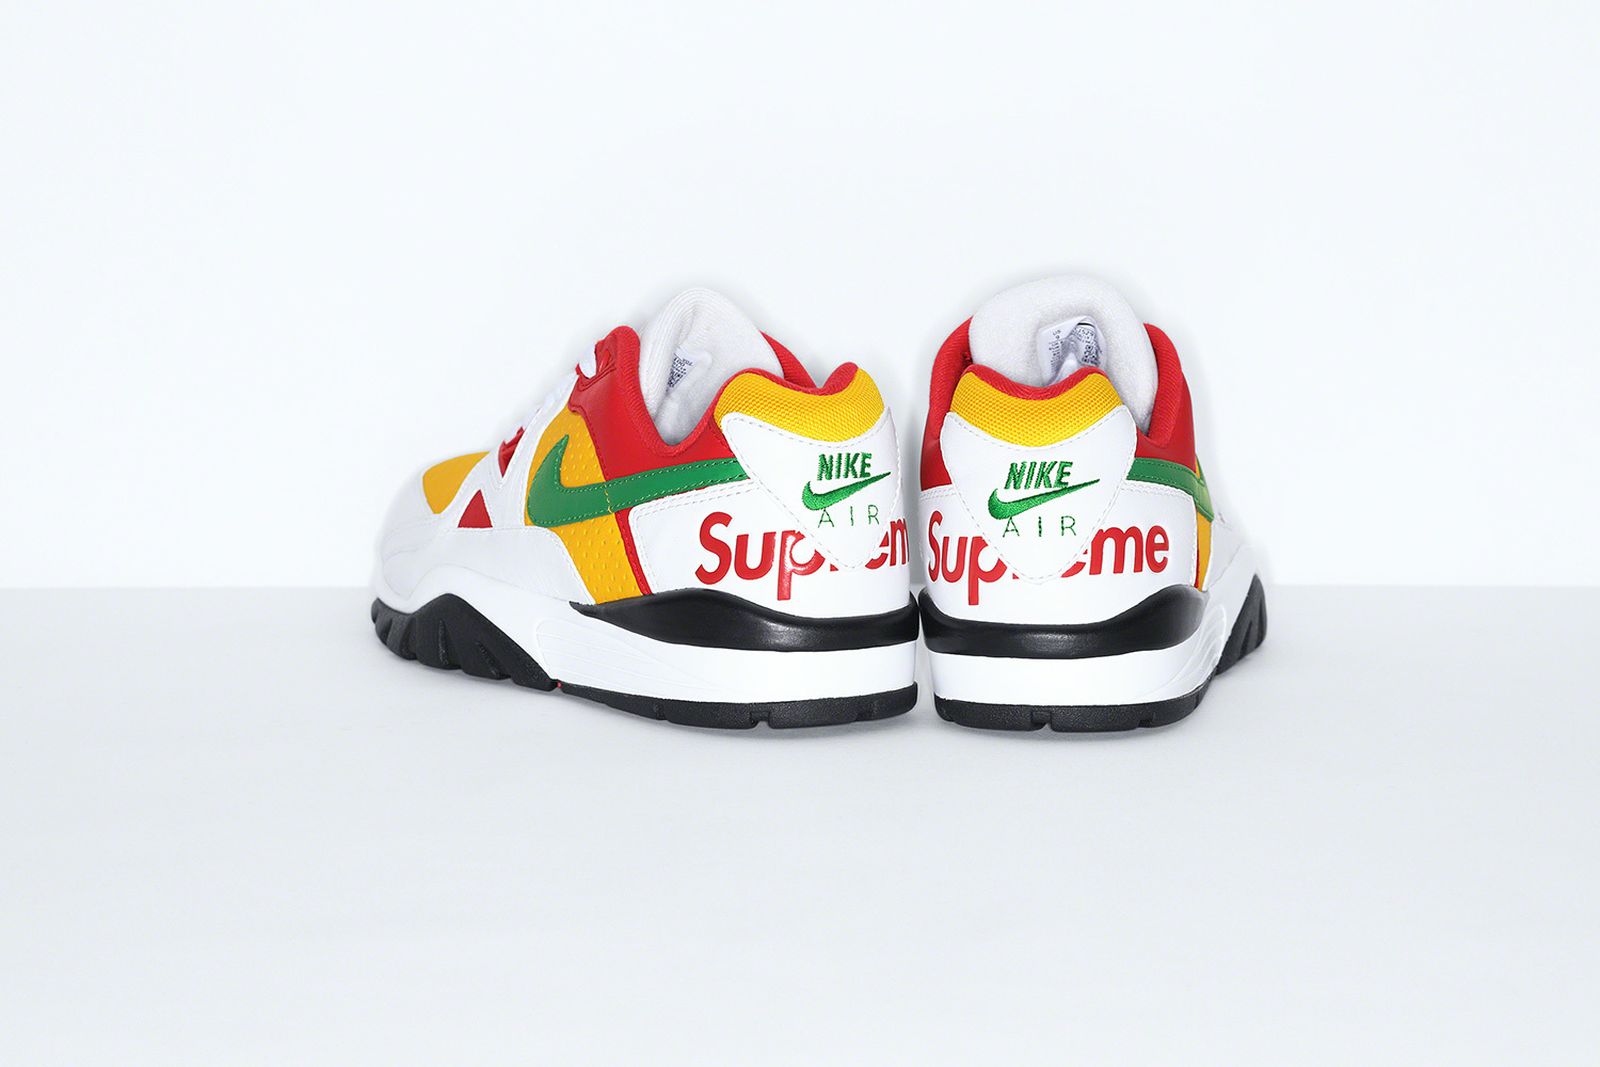 Supreme x Nike Cross Trainer Low Release Information